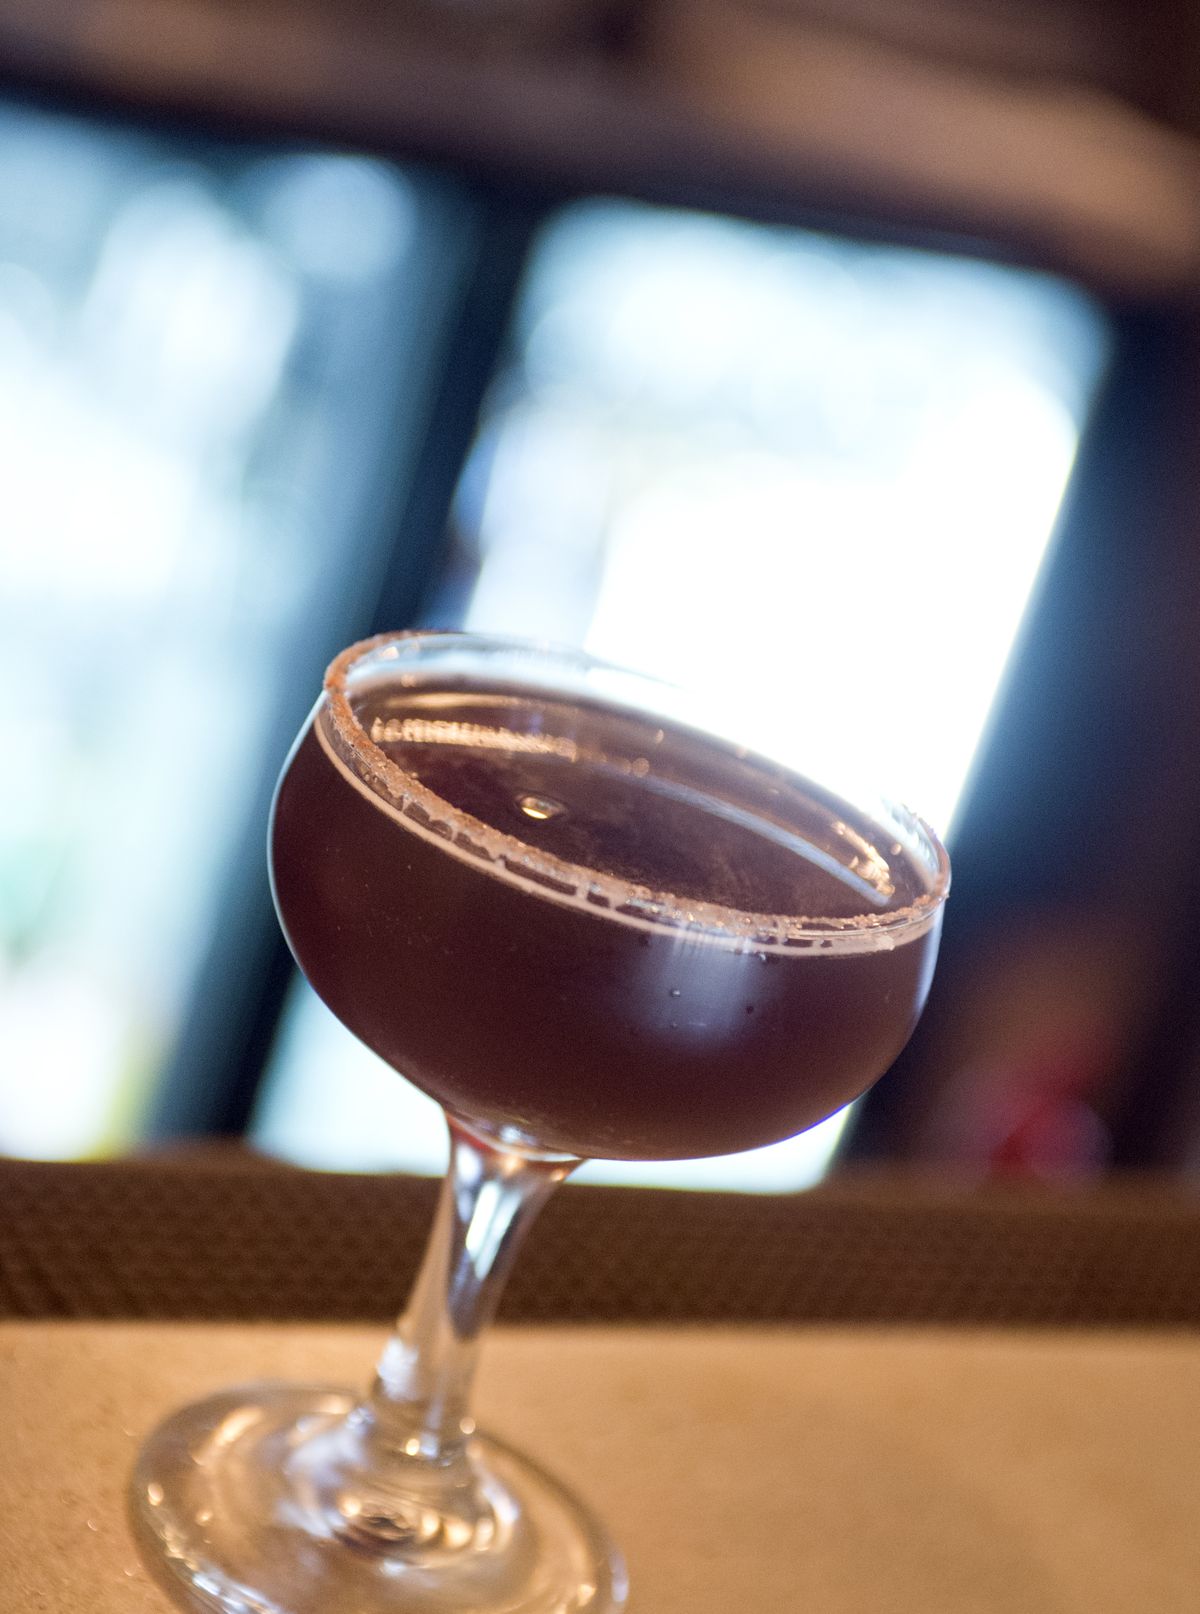 Curtis Day’s November Rain uses bourbon, sweet red vermouth, Licor 43 and a pinch of cinnamon, which he tops with a little stout. (Jesse Tinsley)